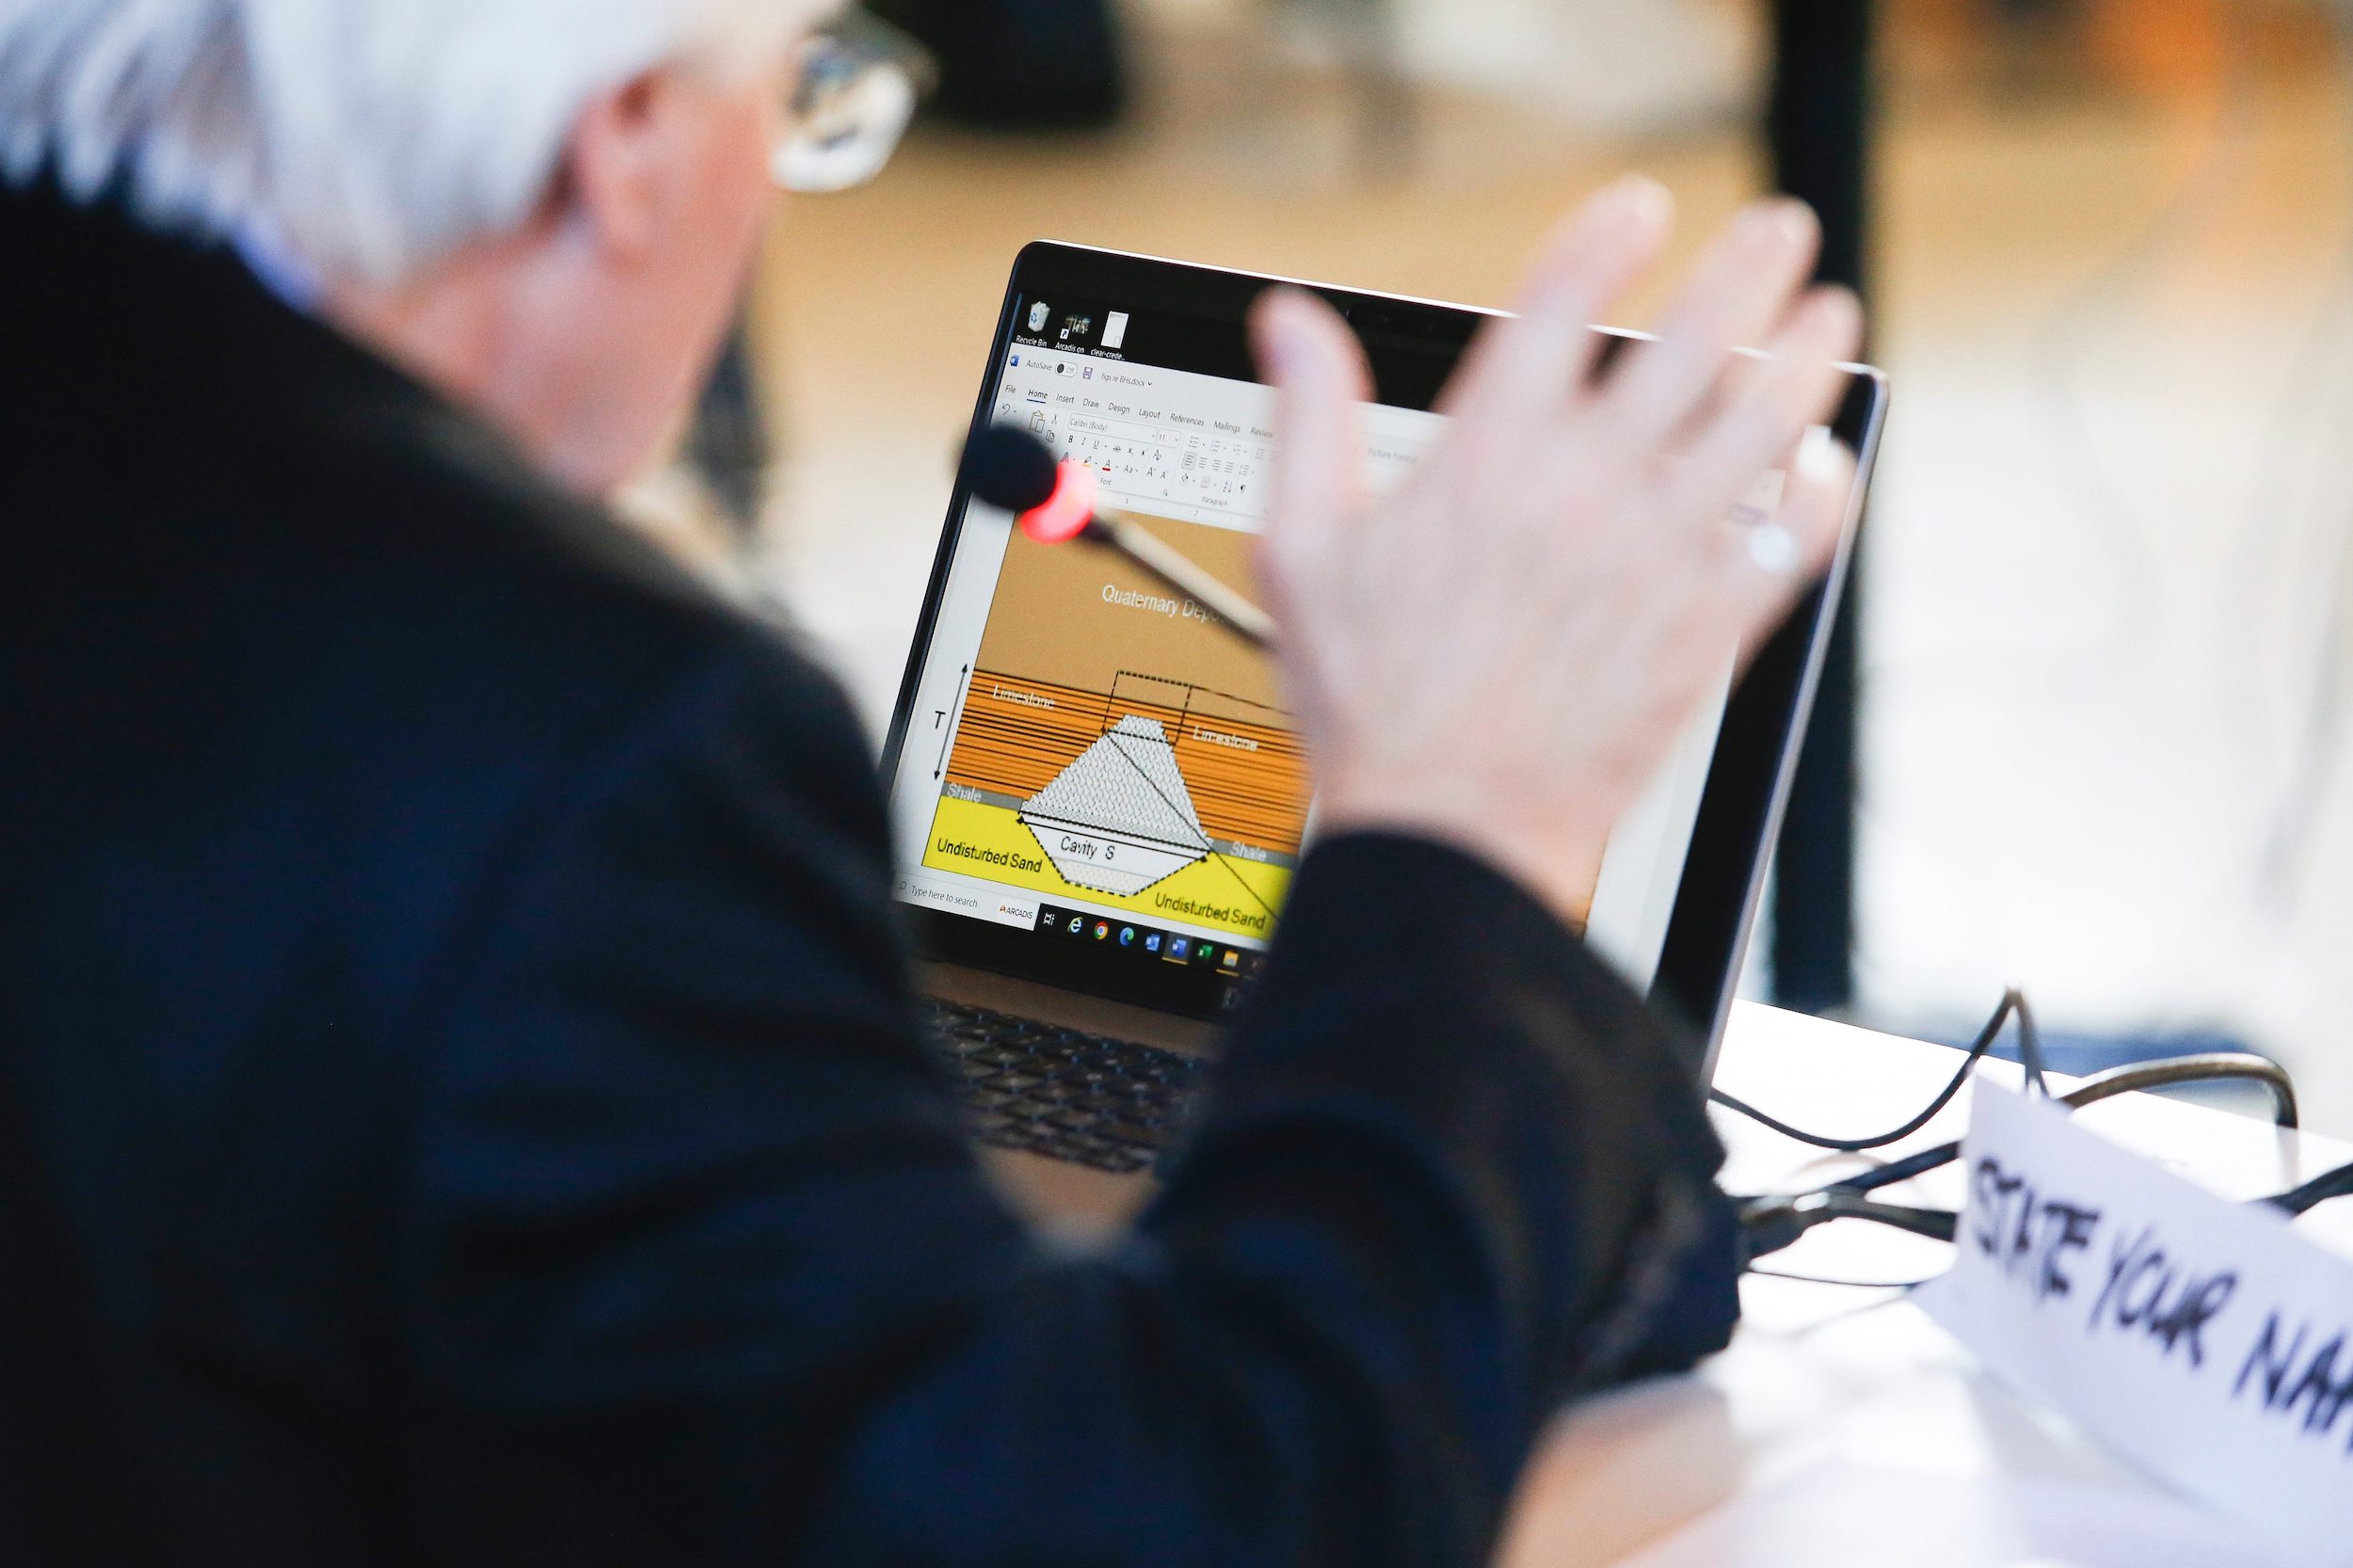 A hydrogeologist looks at his laptop while presenting evidence regarding Sio Silica's proposed sand mining technique during clean environment commission hearings in Steinbach, Manitoba